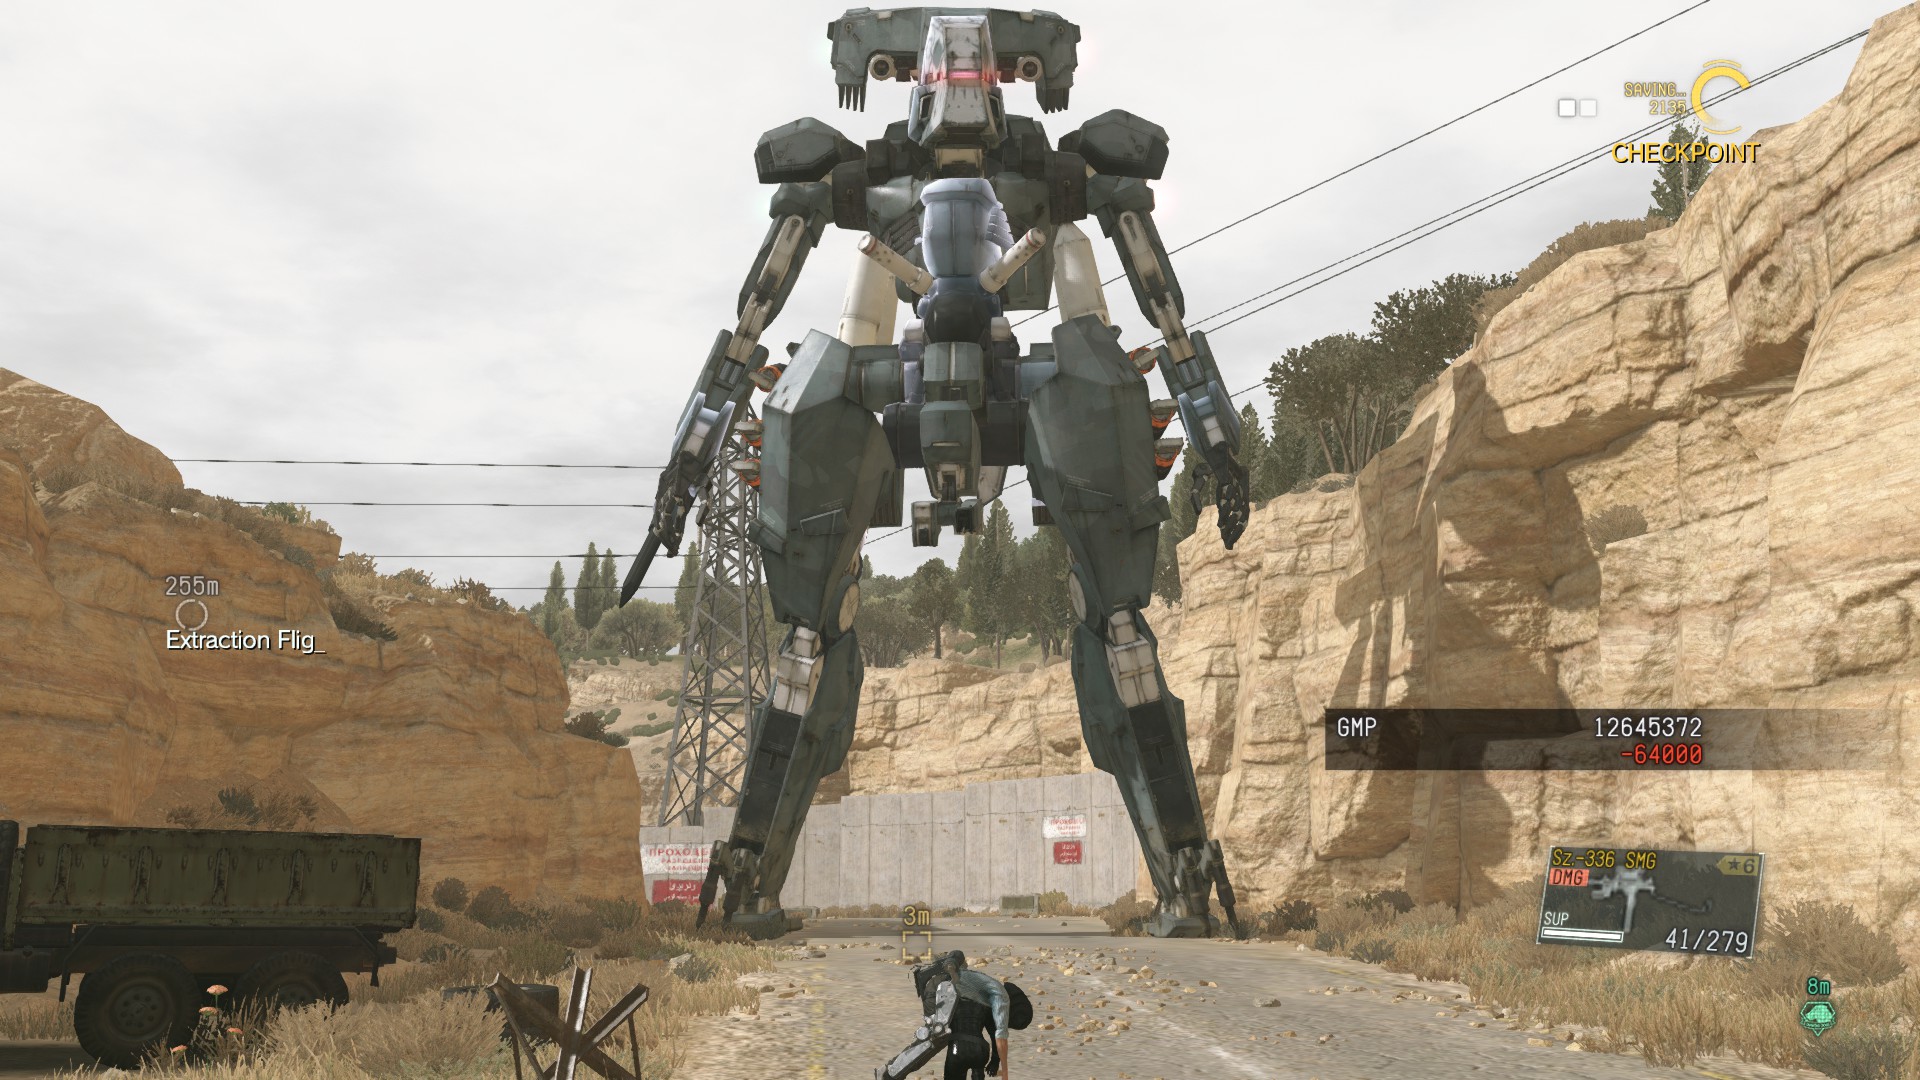 METAL GEAR SOLID V: THE PHANTOM PAIN - All Vehicles and Missions Guide - Hellbound - 09ABF83